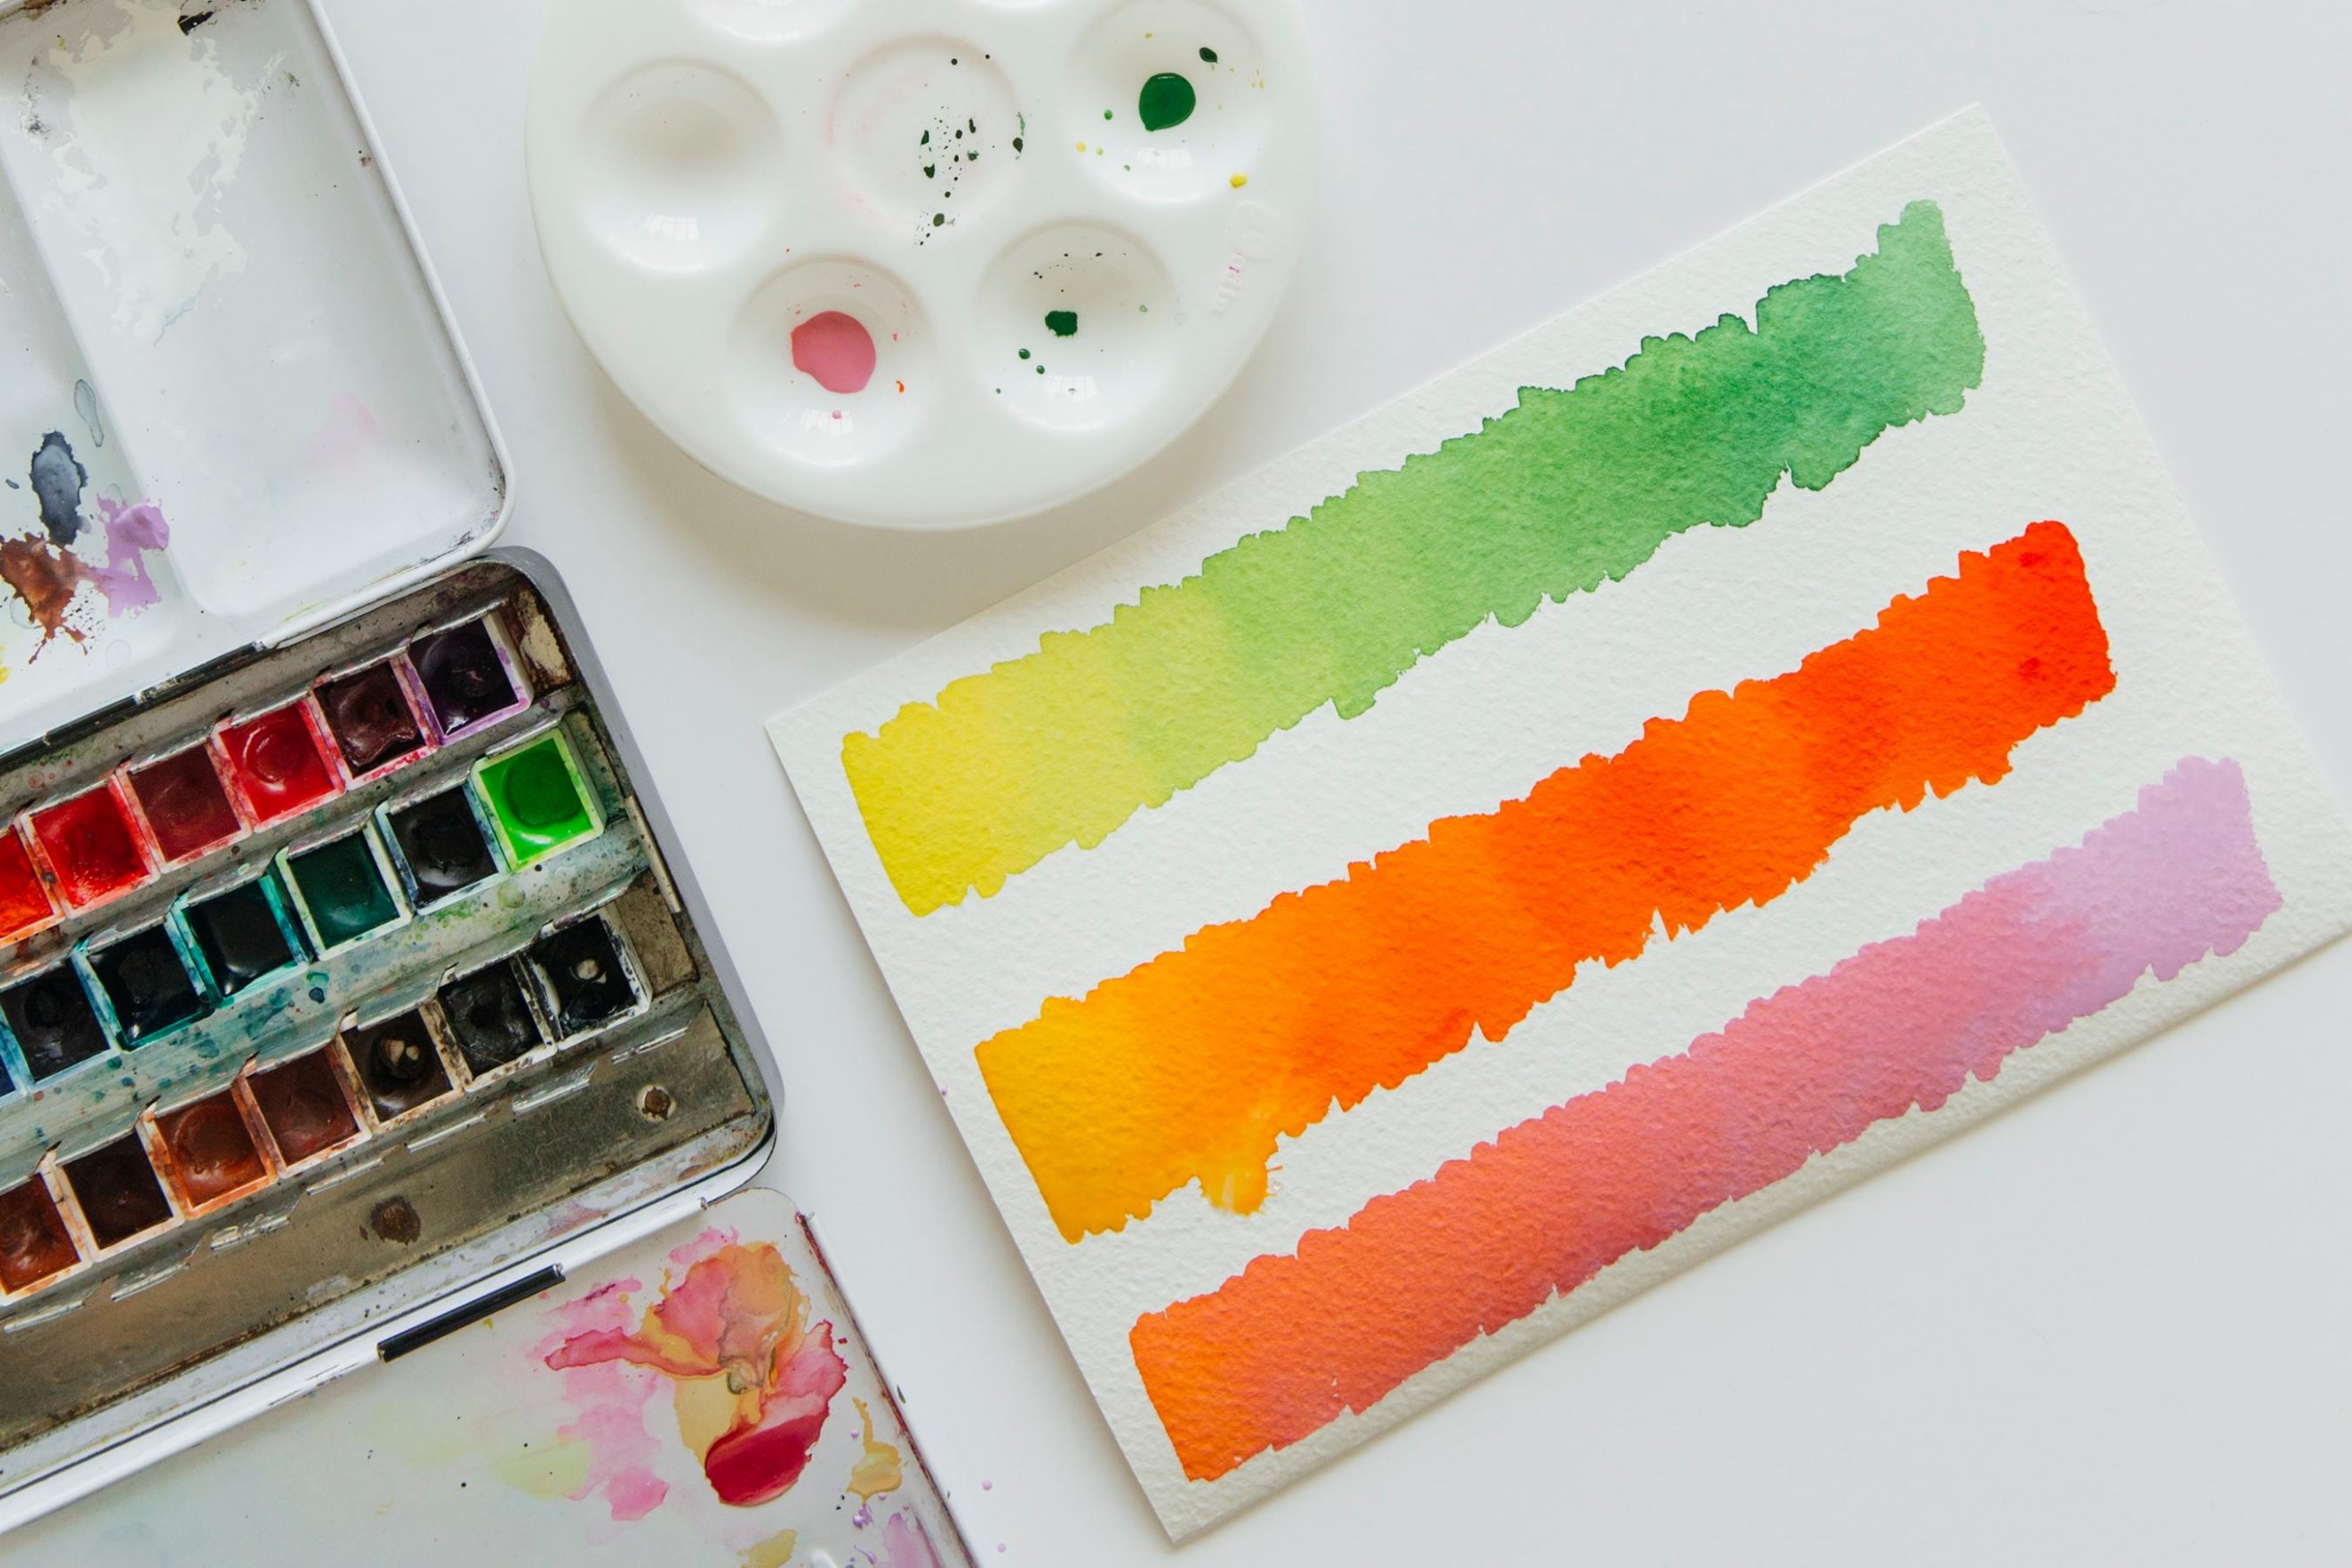 7 Basic Watercolor Techniques For Beginners Artsy Beginner Watercolor Painting Lessons Near Me